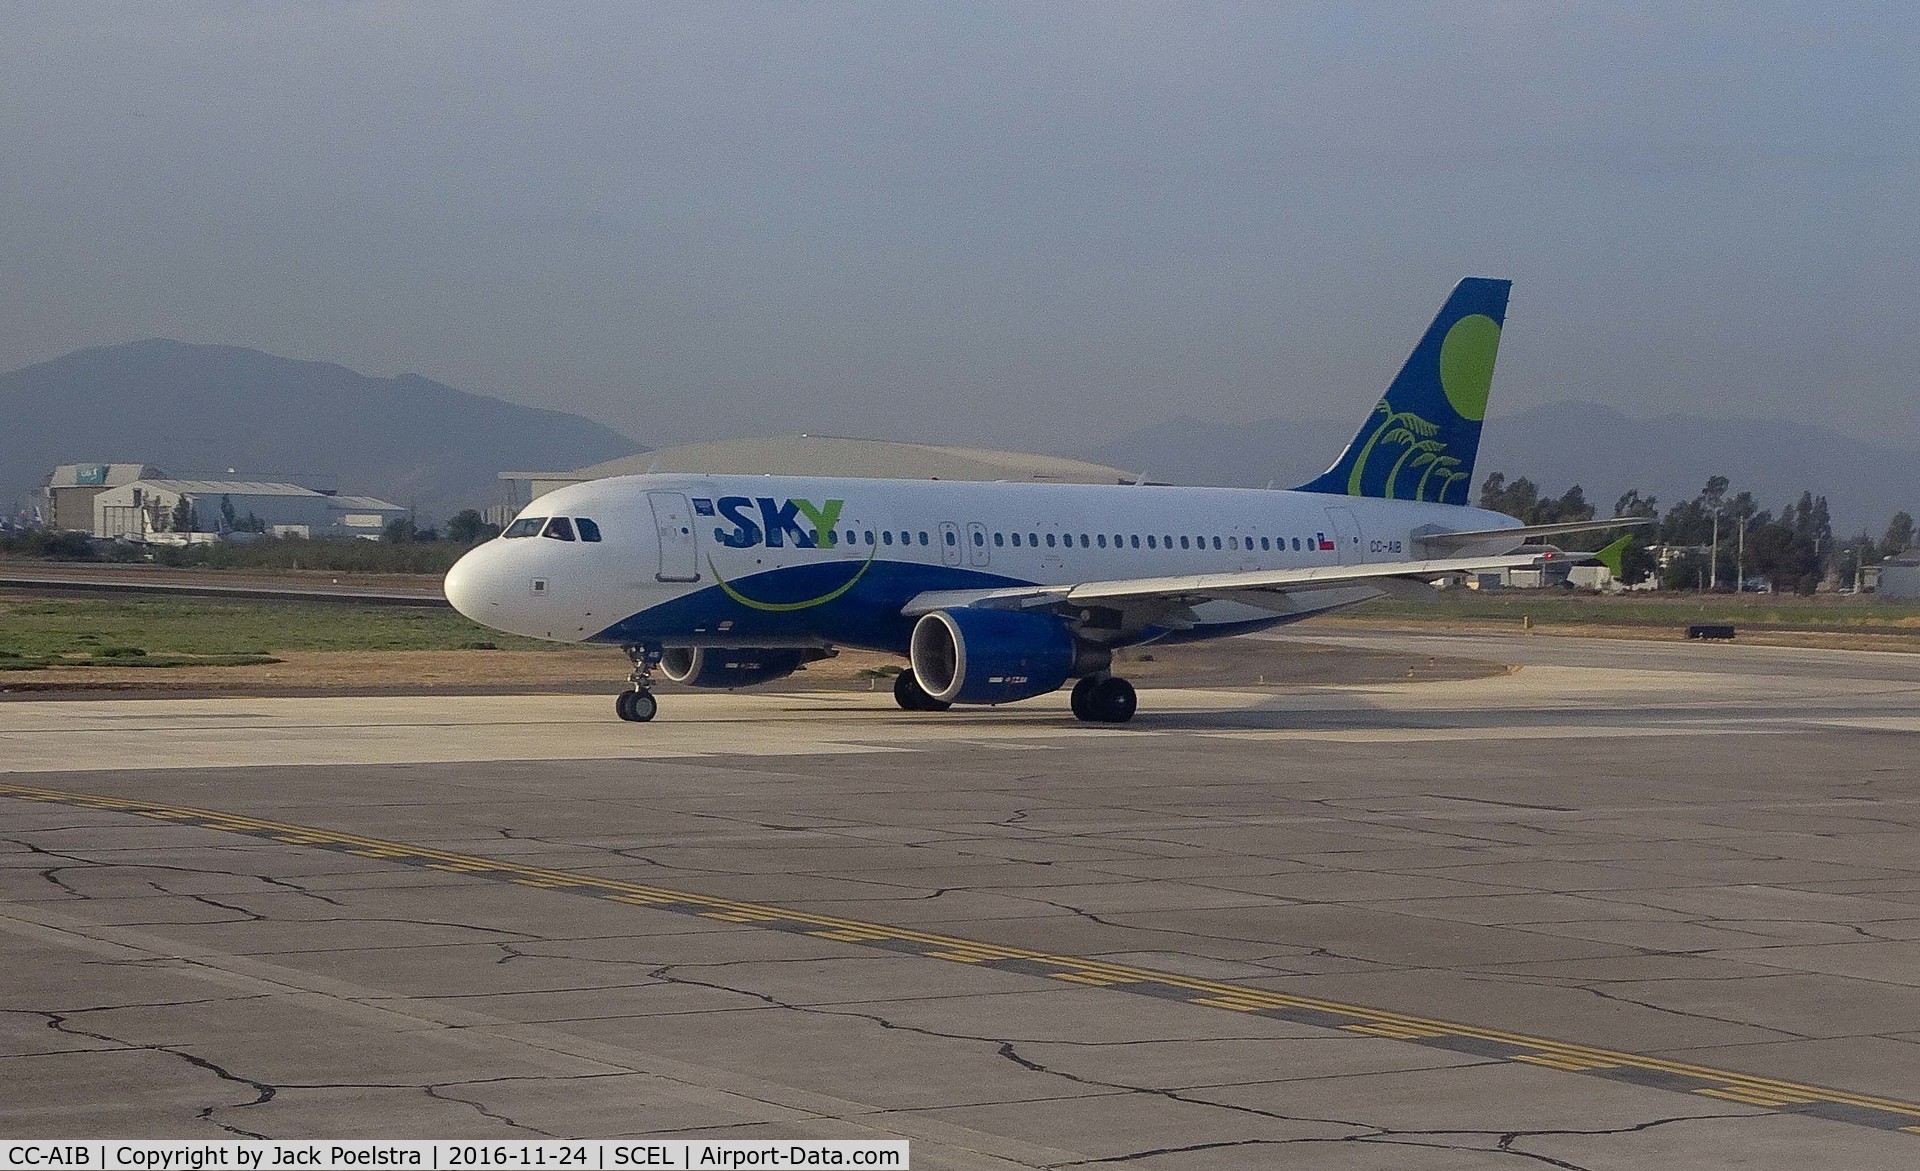 CC-AIB, 2004 Airbus A319-111 C/N 2378, CC-AIB of Sky Airlines at SCL